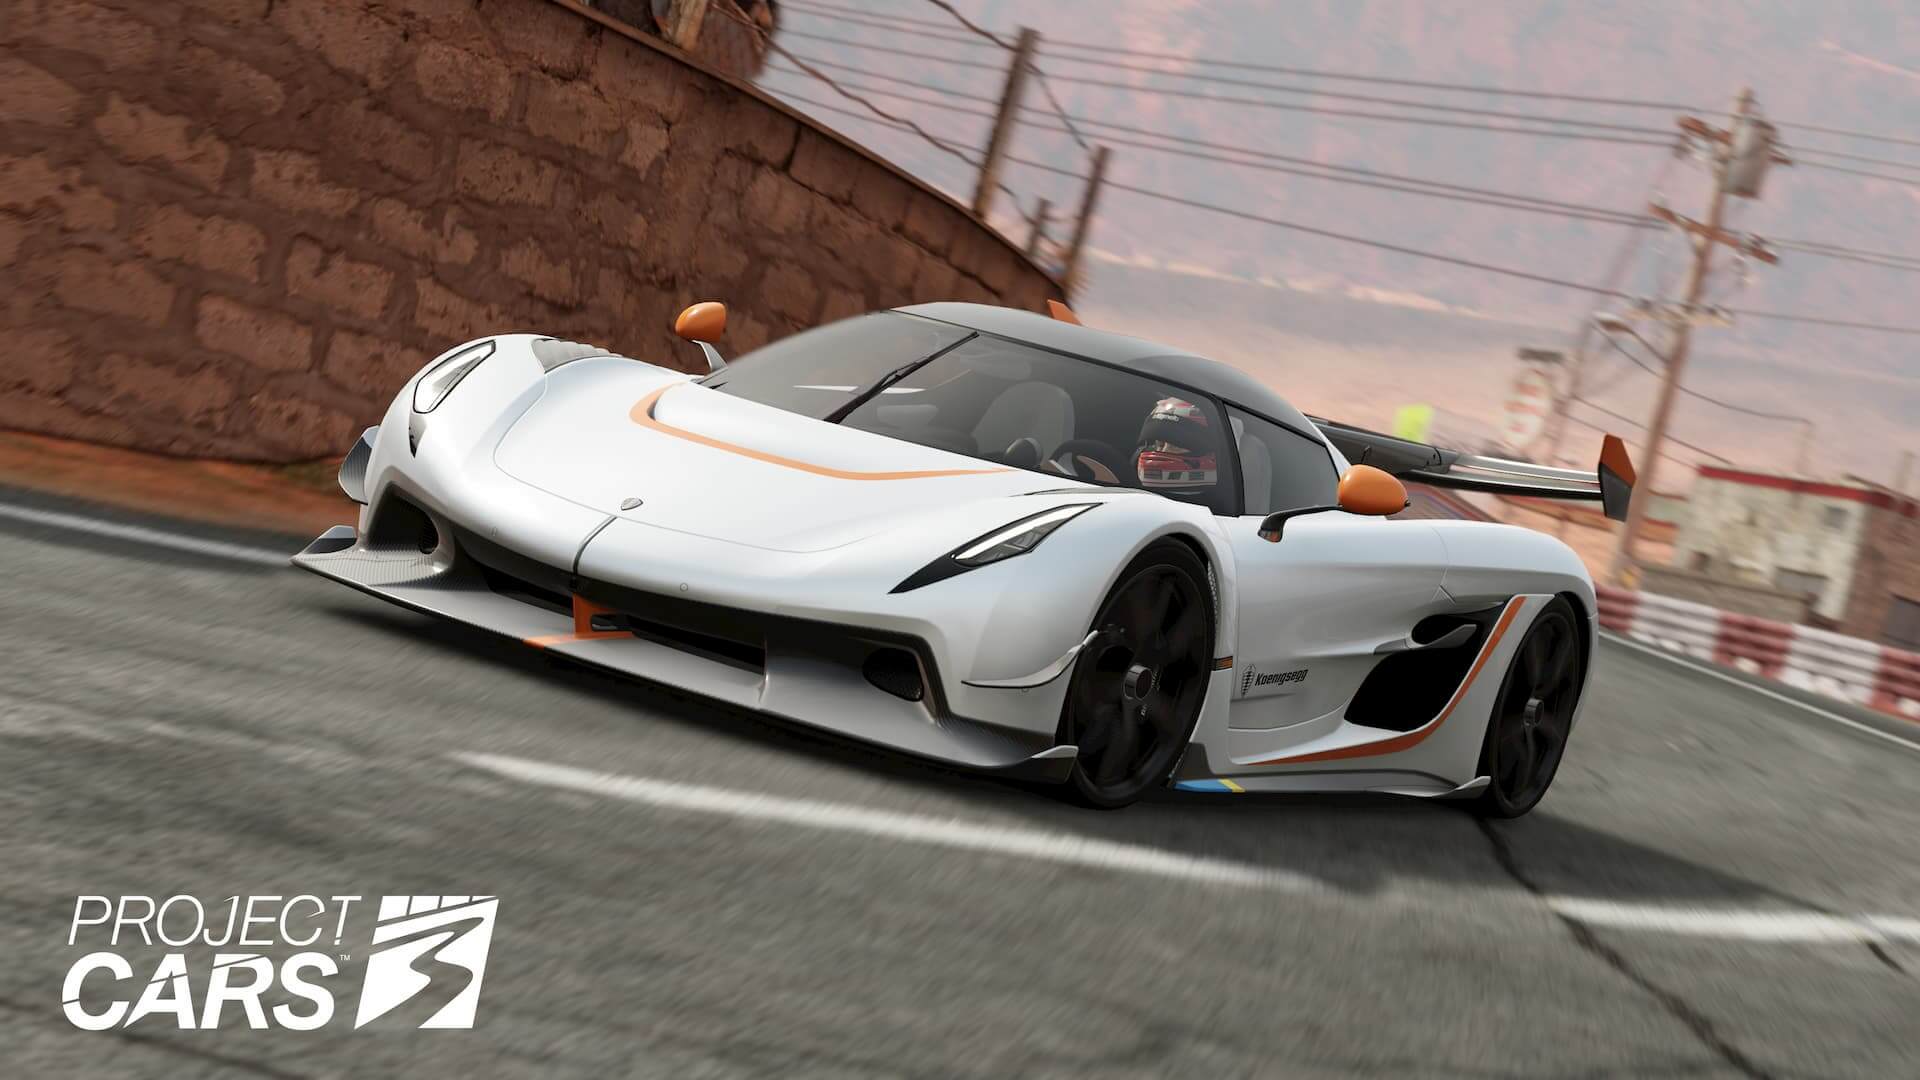 Here is over an hour of gameplay footage from Project CARS 3